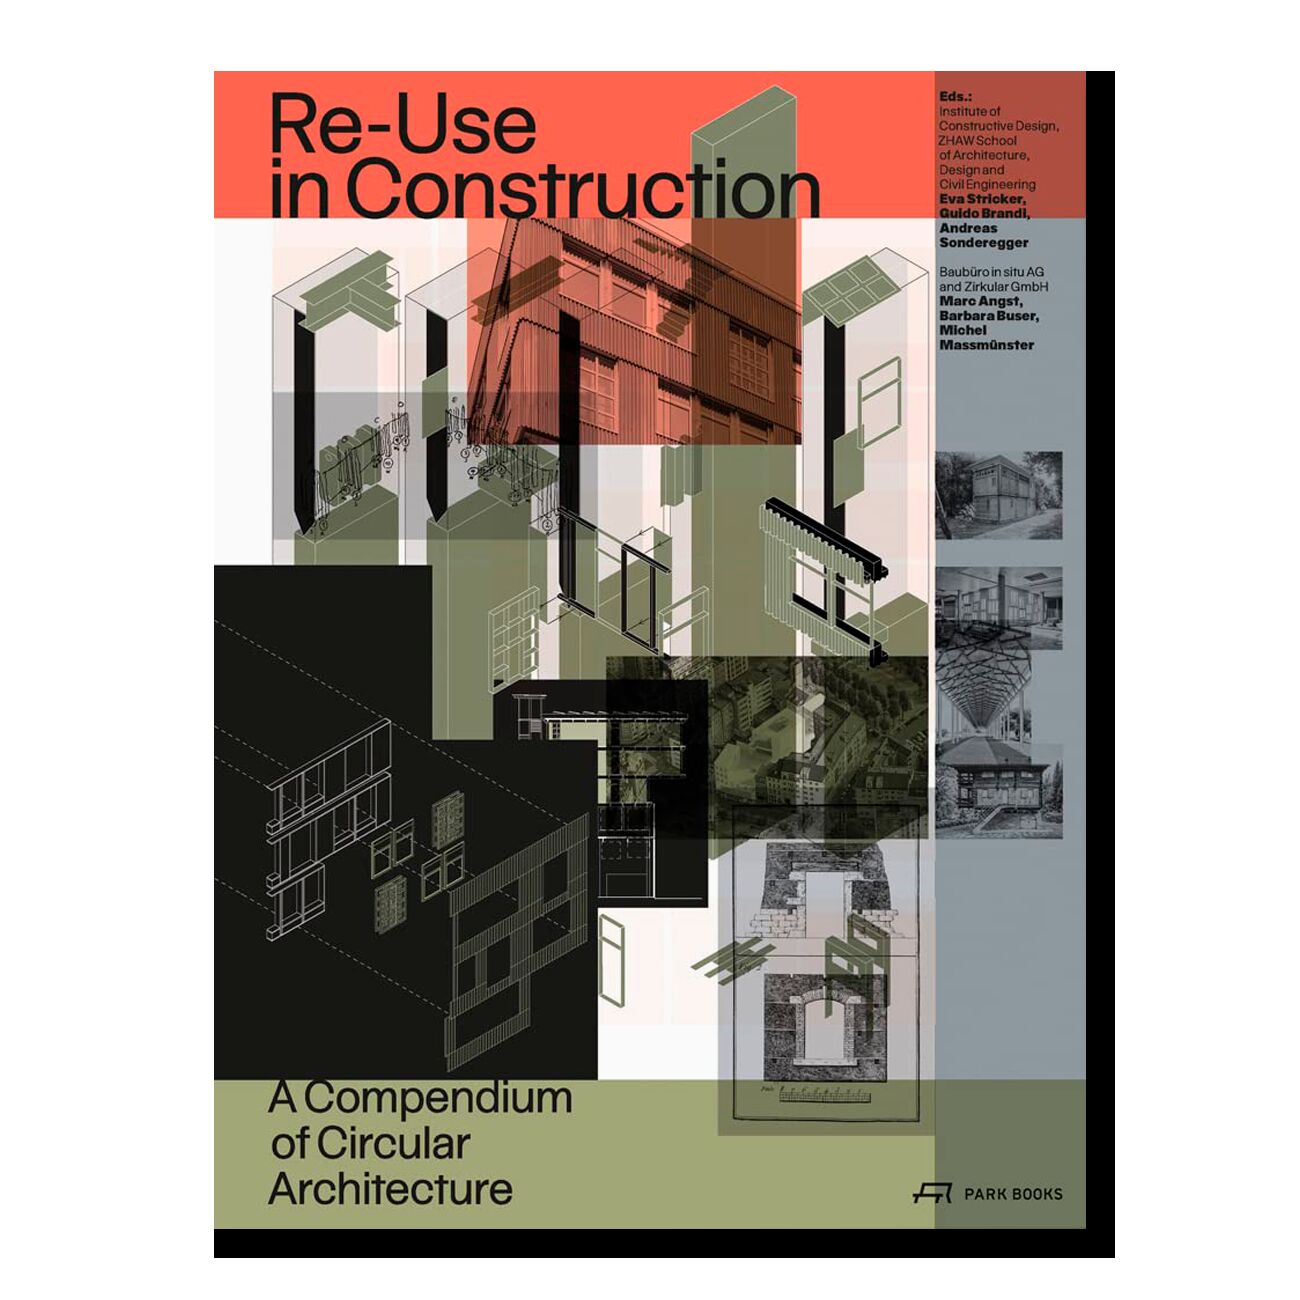 Re-Use in Construction: A Compendium of Circular Architecture